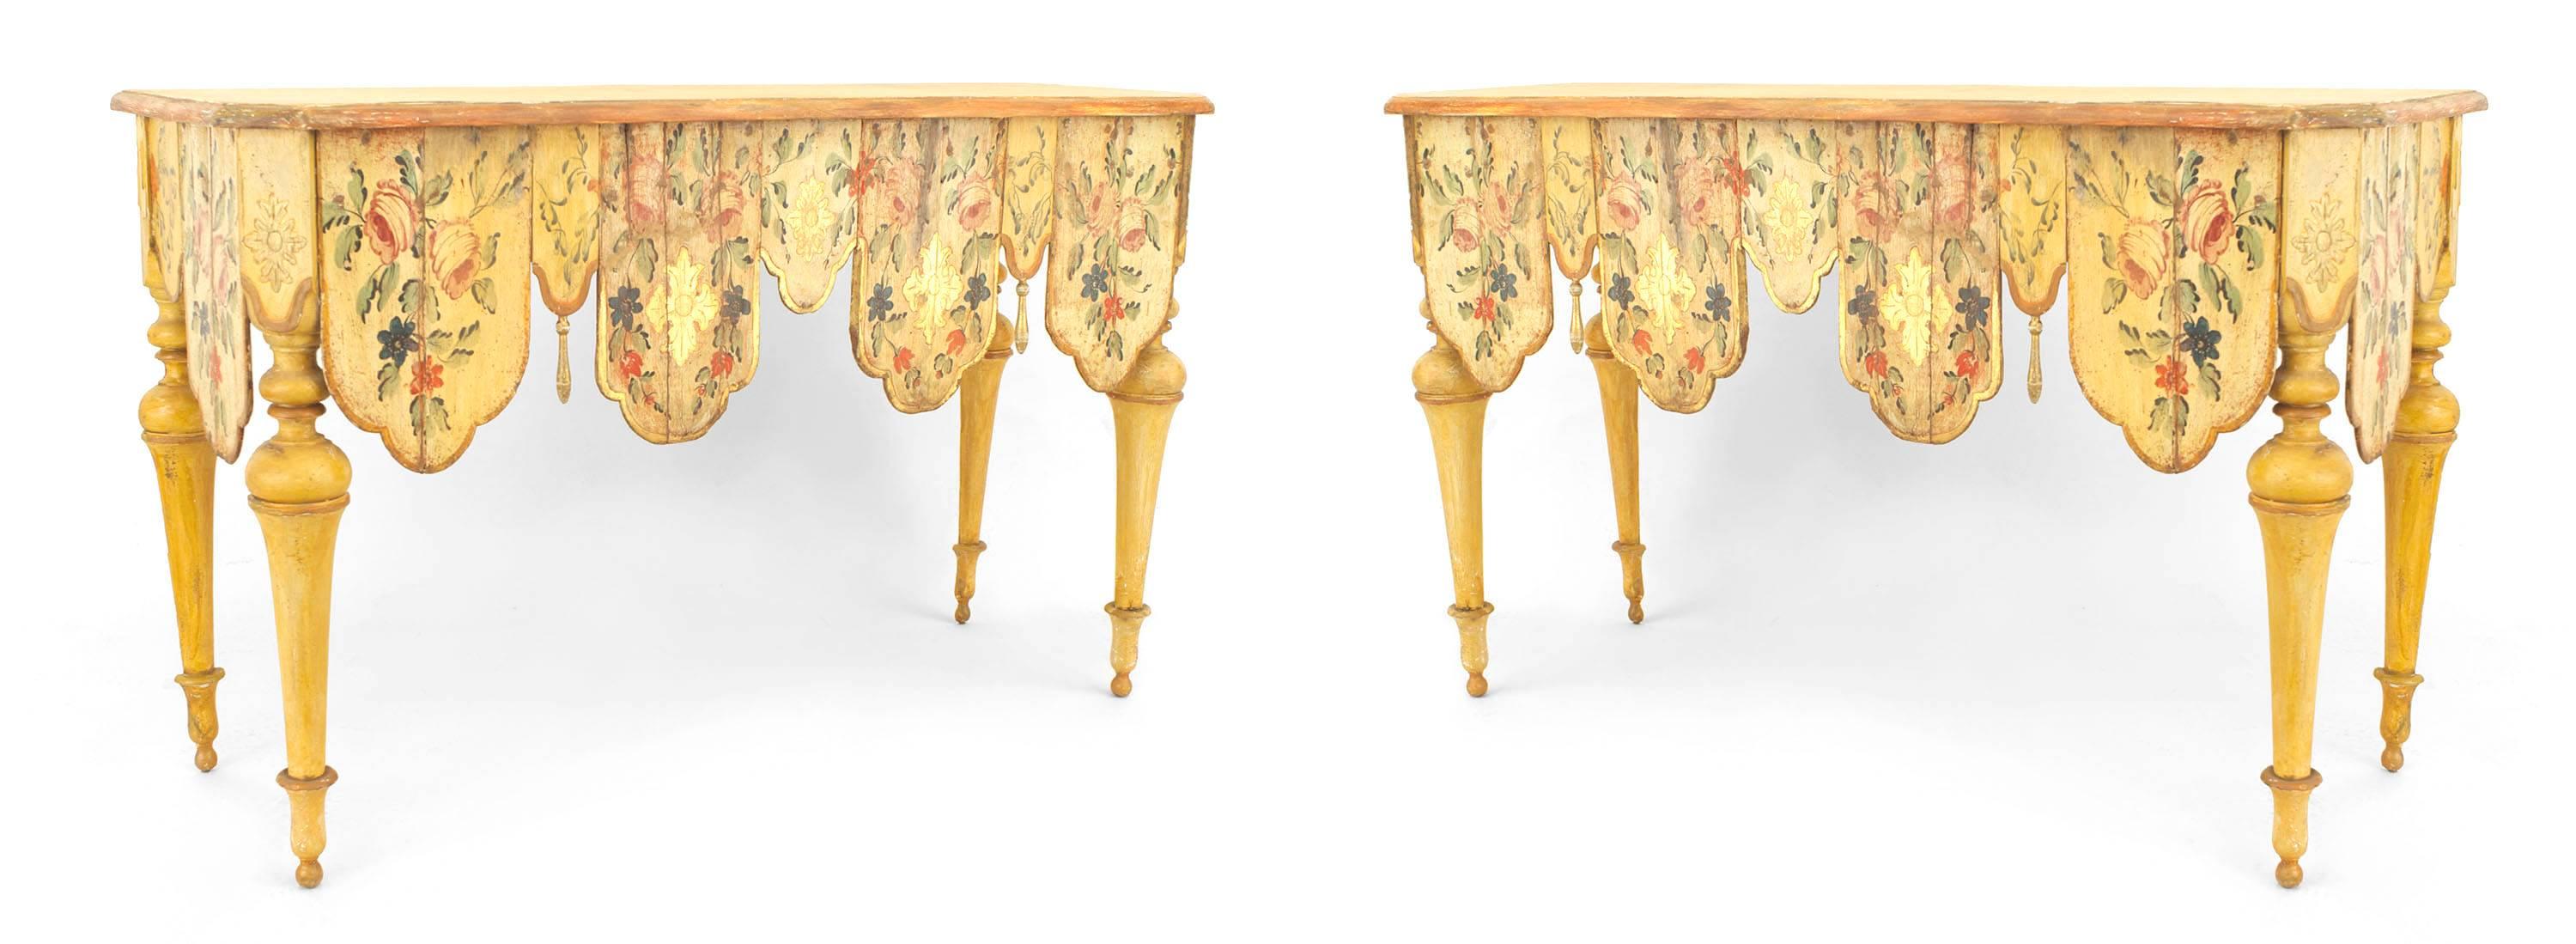 Pair of Venetian style polychrome painted console tables with shaped aprons carved with tassels and painted with floral designs.